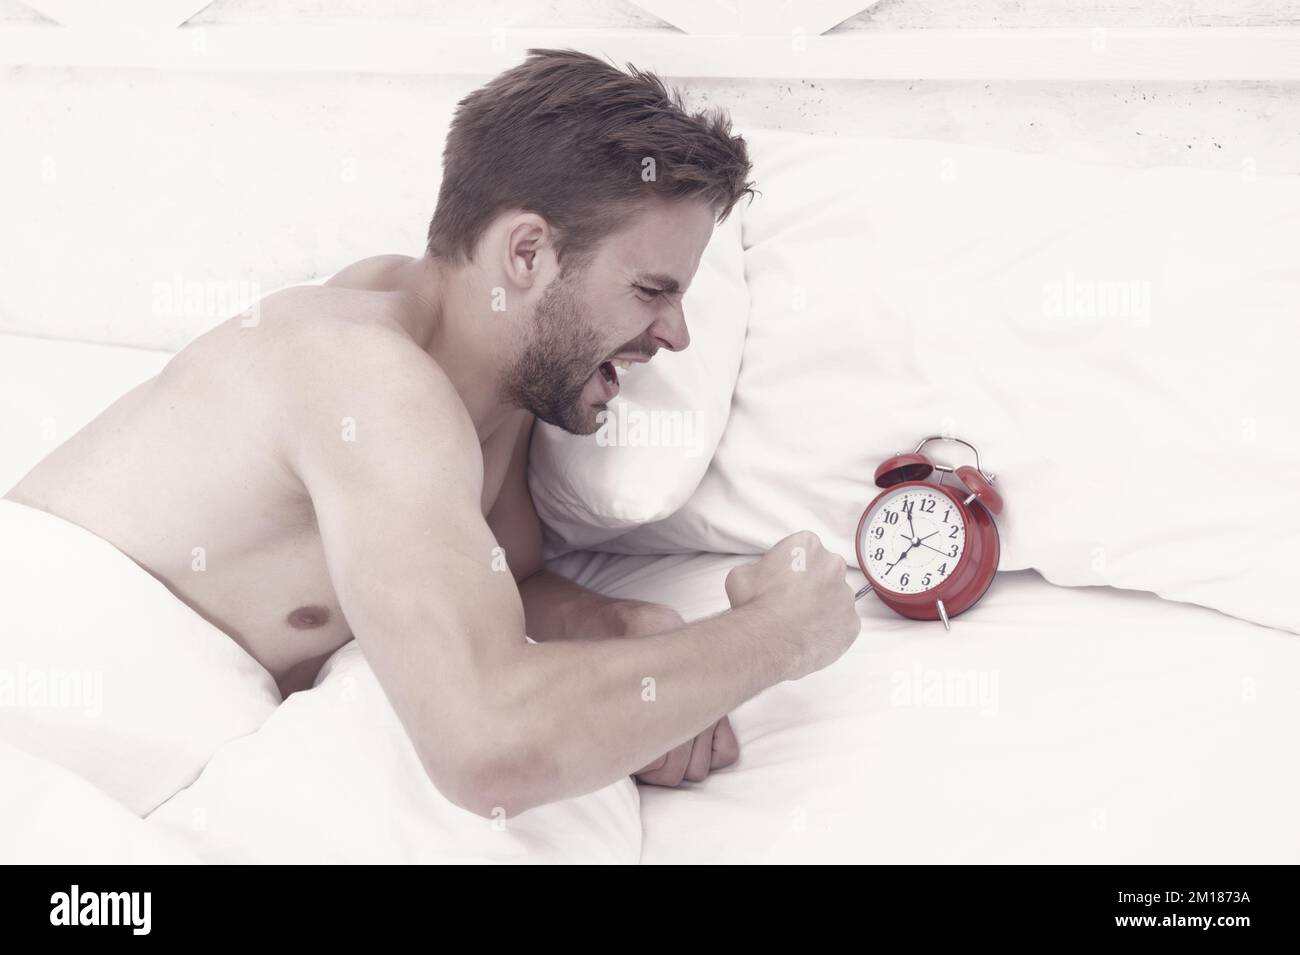 He is late. Angry guy break alarm clock in bed. Unshaven man awake from sleep. Keeping late hours. Wake timer. Wakeup time. Morning stress. Being late Stock Photo